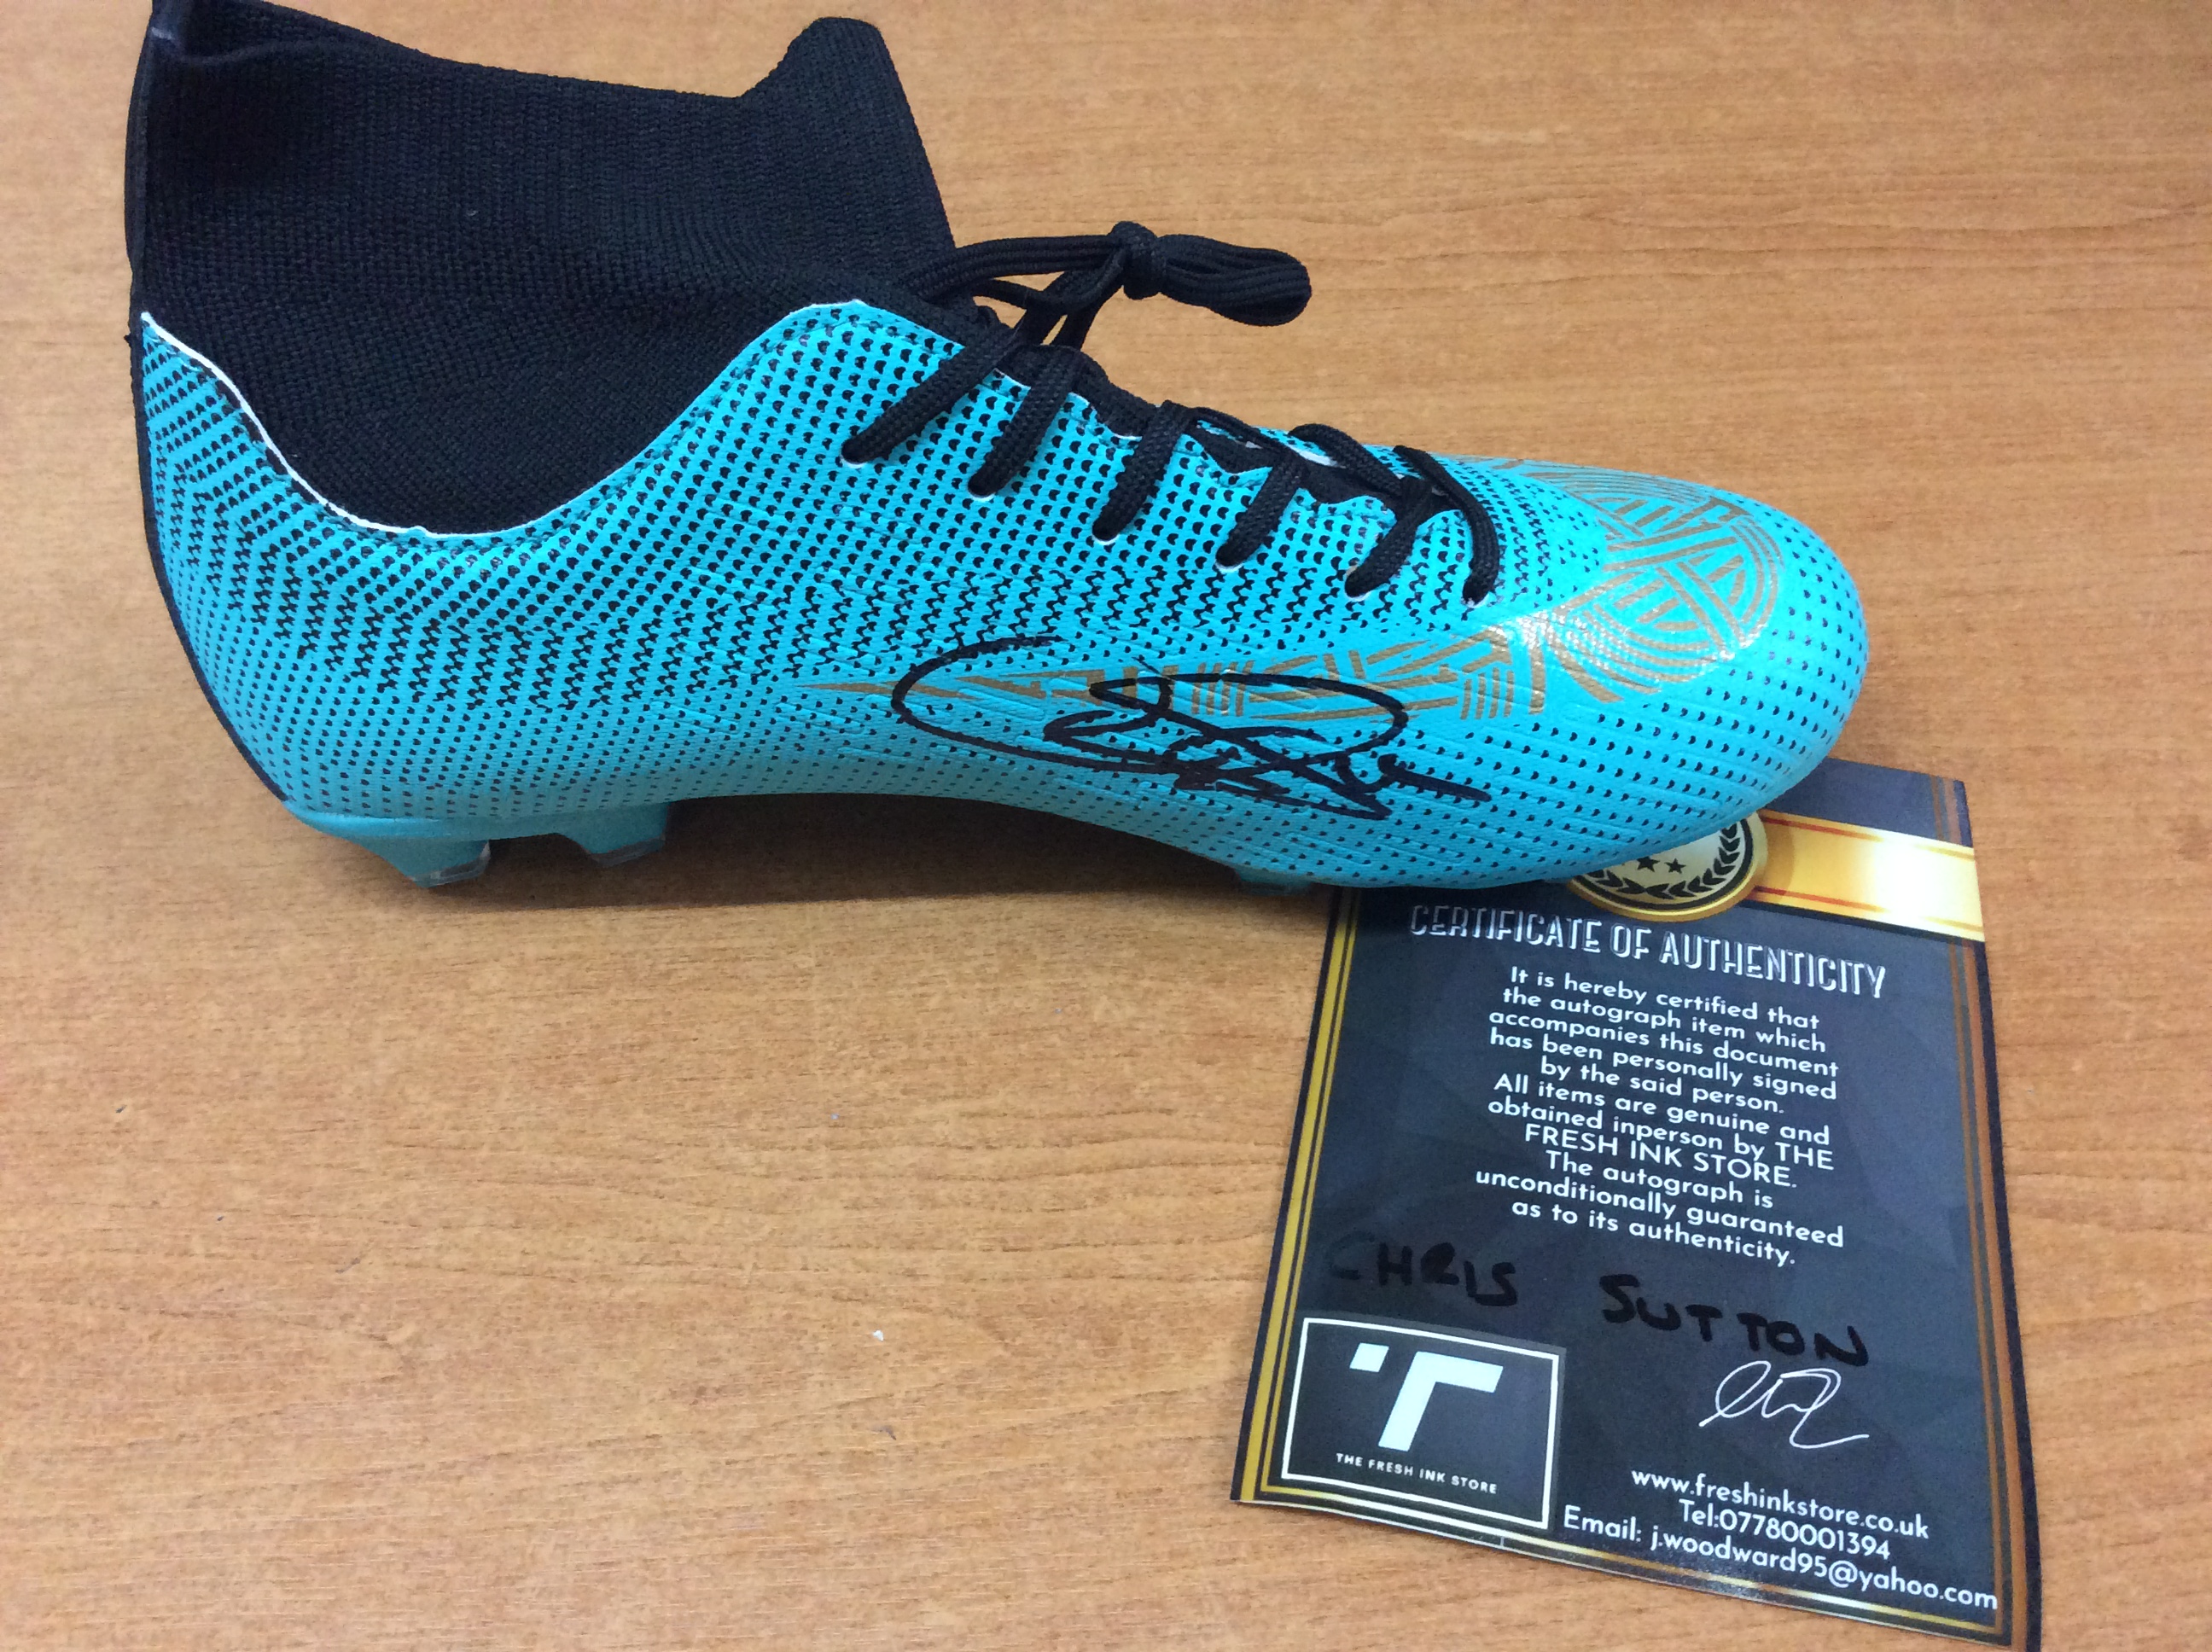 Chris Sutton Signed Football Boot - Image 2 of 2